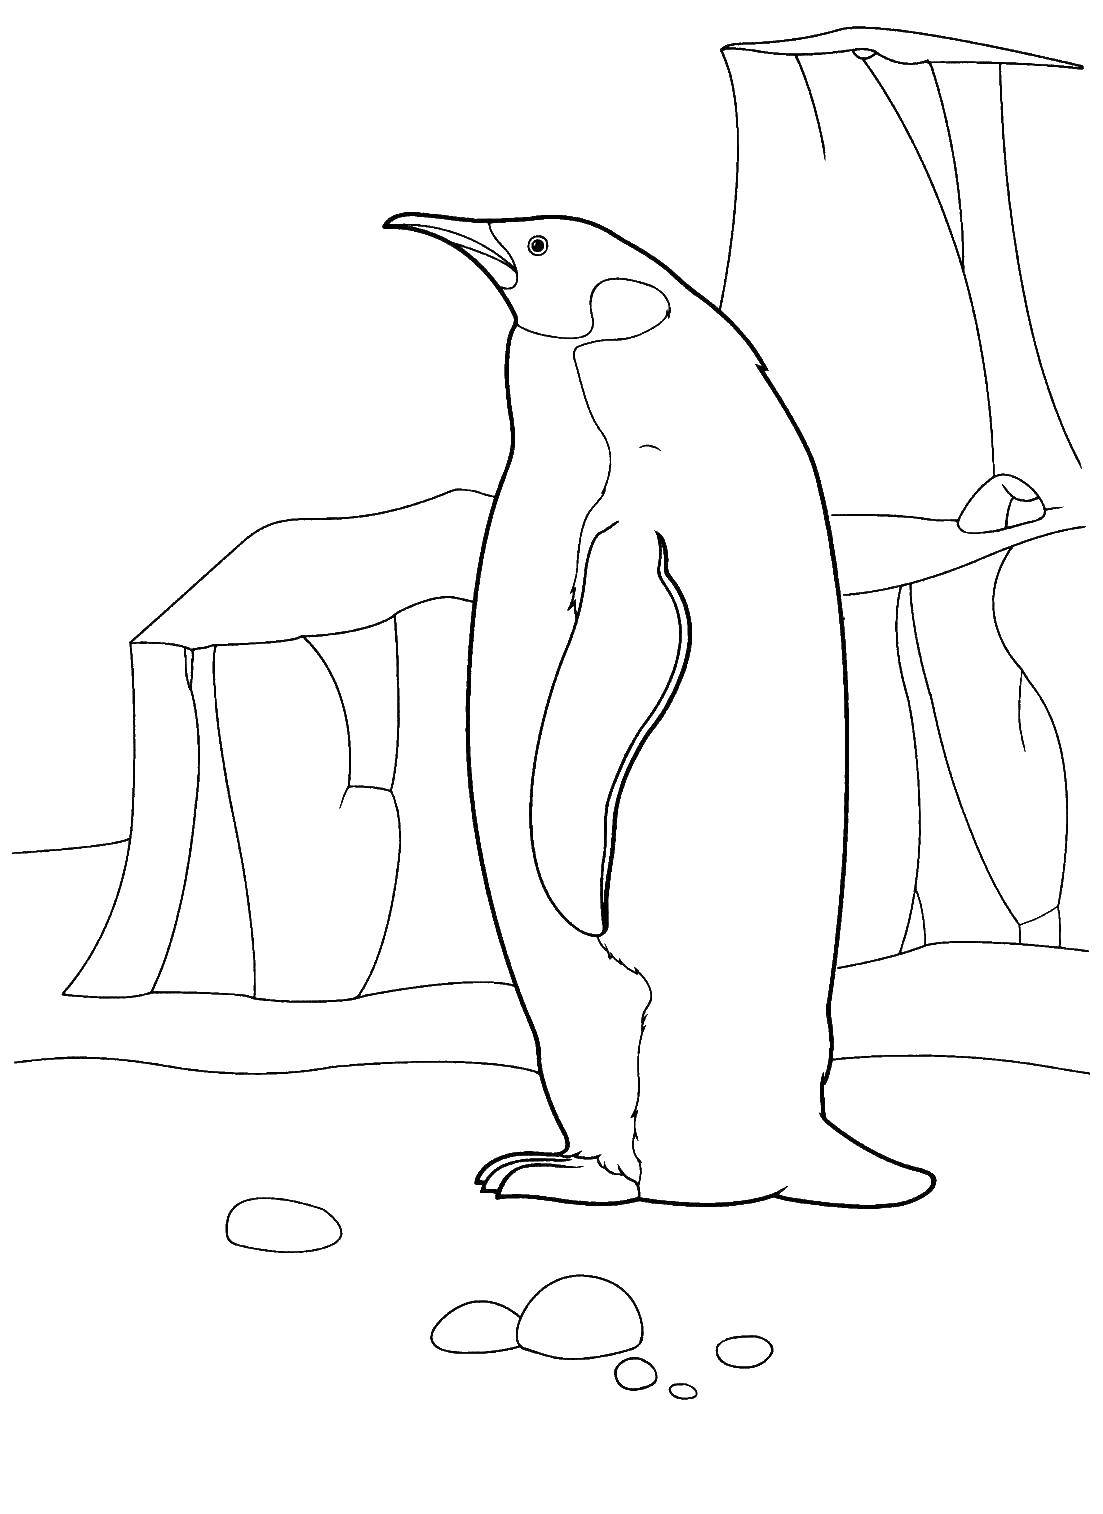 Coloring Penguin in the North. Category the penguin. Tags:  penguin, birds.